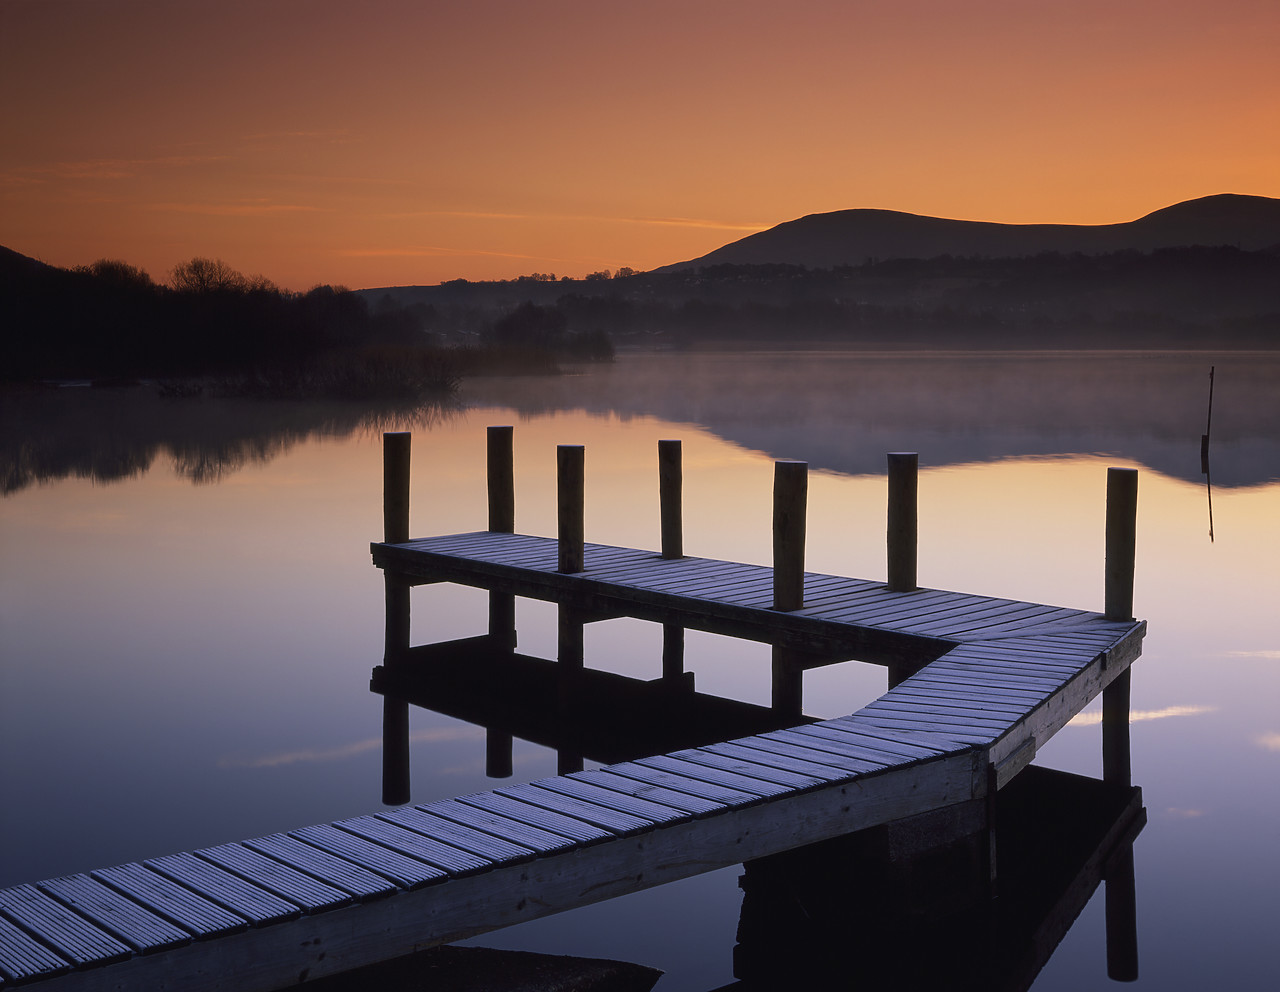 #080008-1 - Frosted Jetty on Derwent Water at Sunrise, Lake District National Park, Cumbria, England